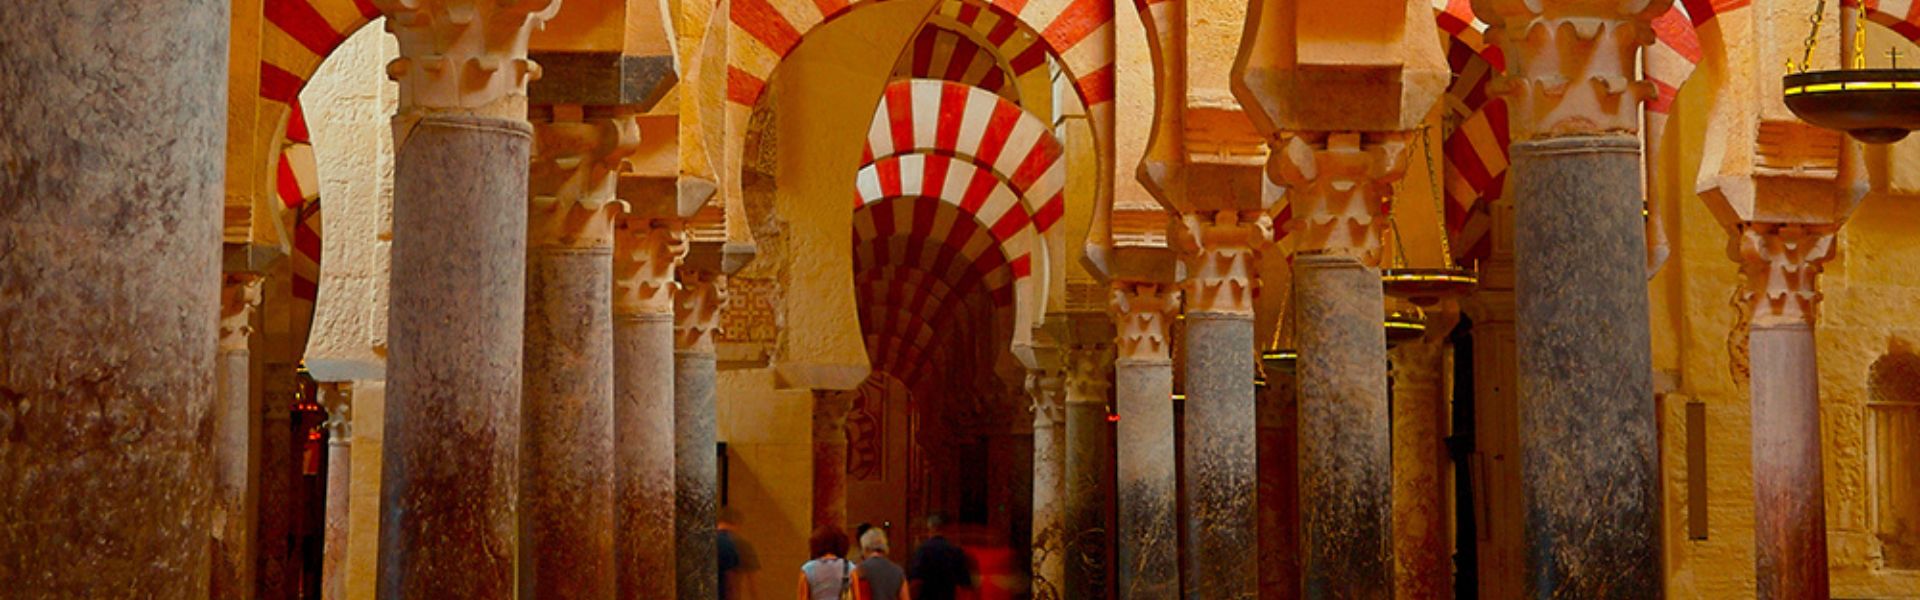 Madrid Park Guell Discover Spain Campaign scrolling banner 10Jan23 (2)